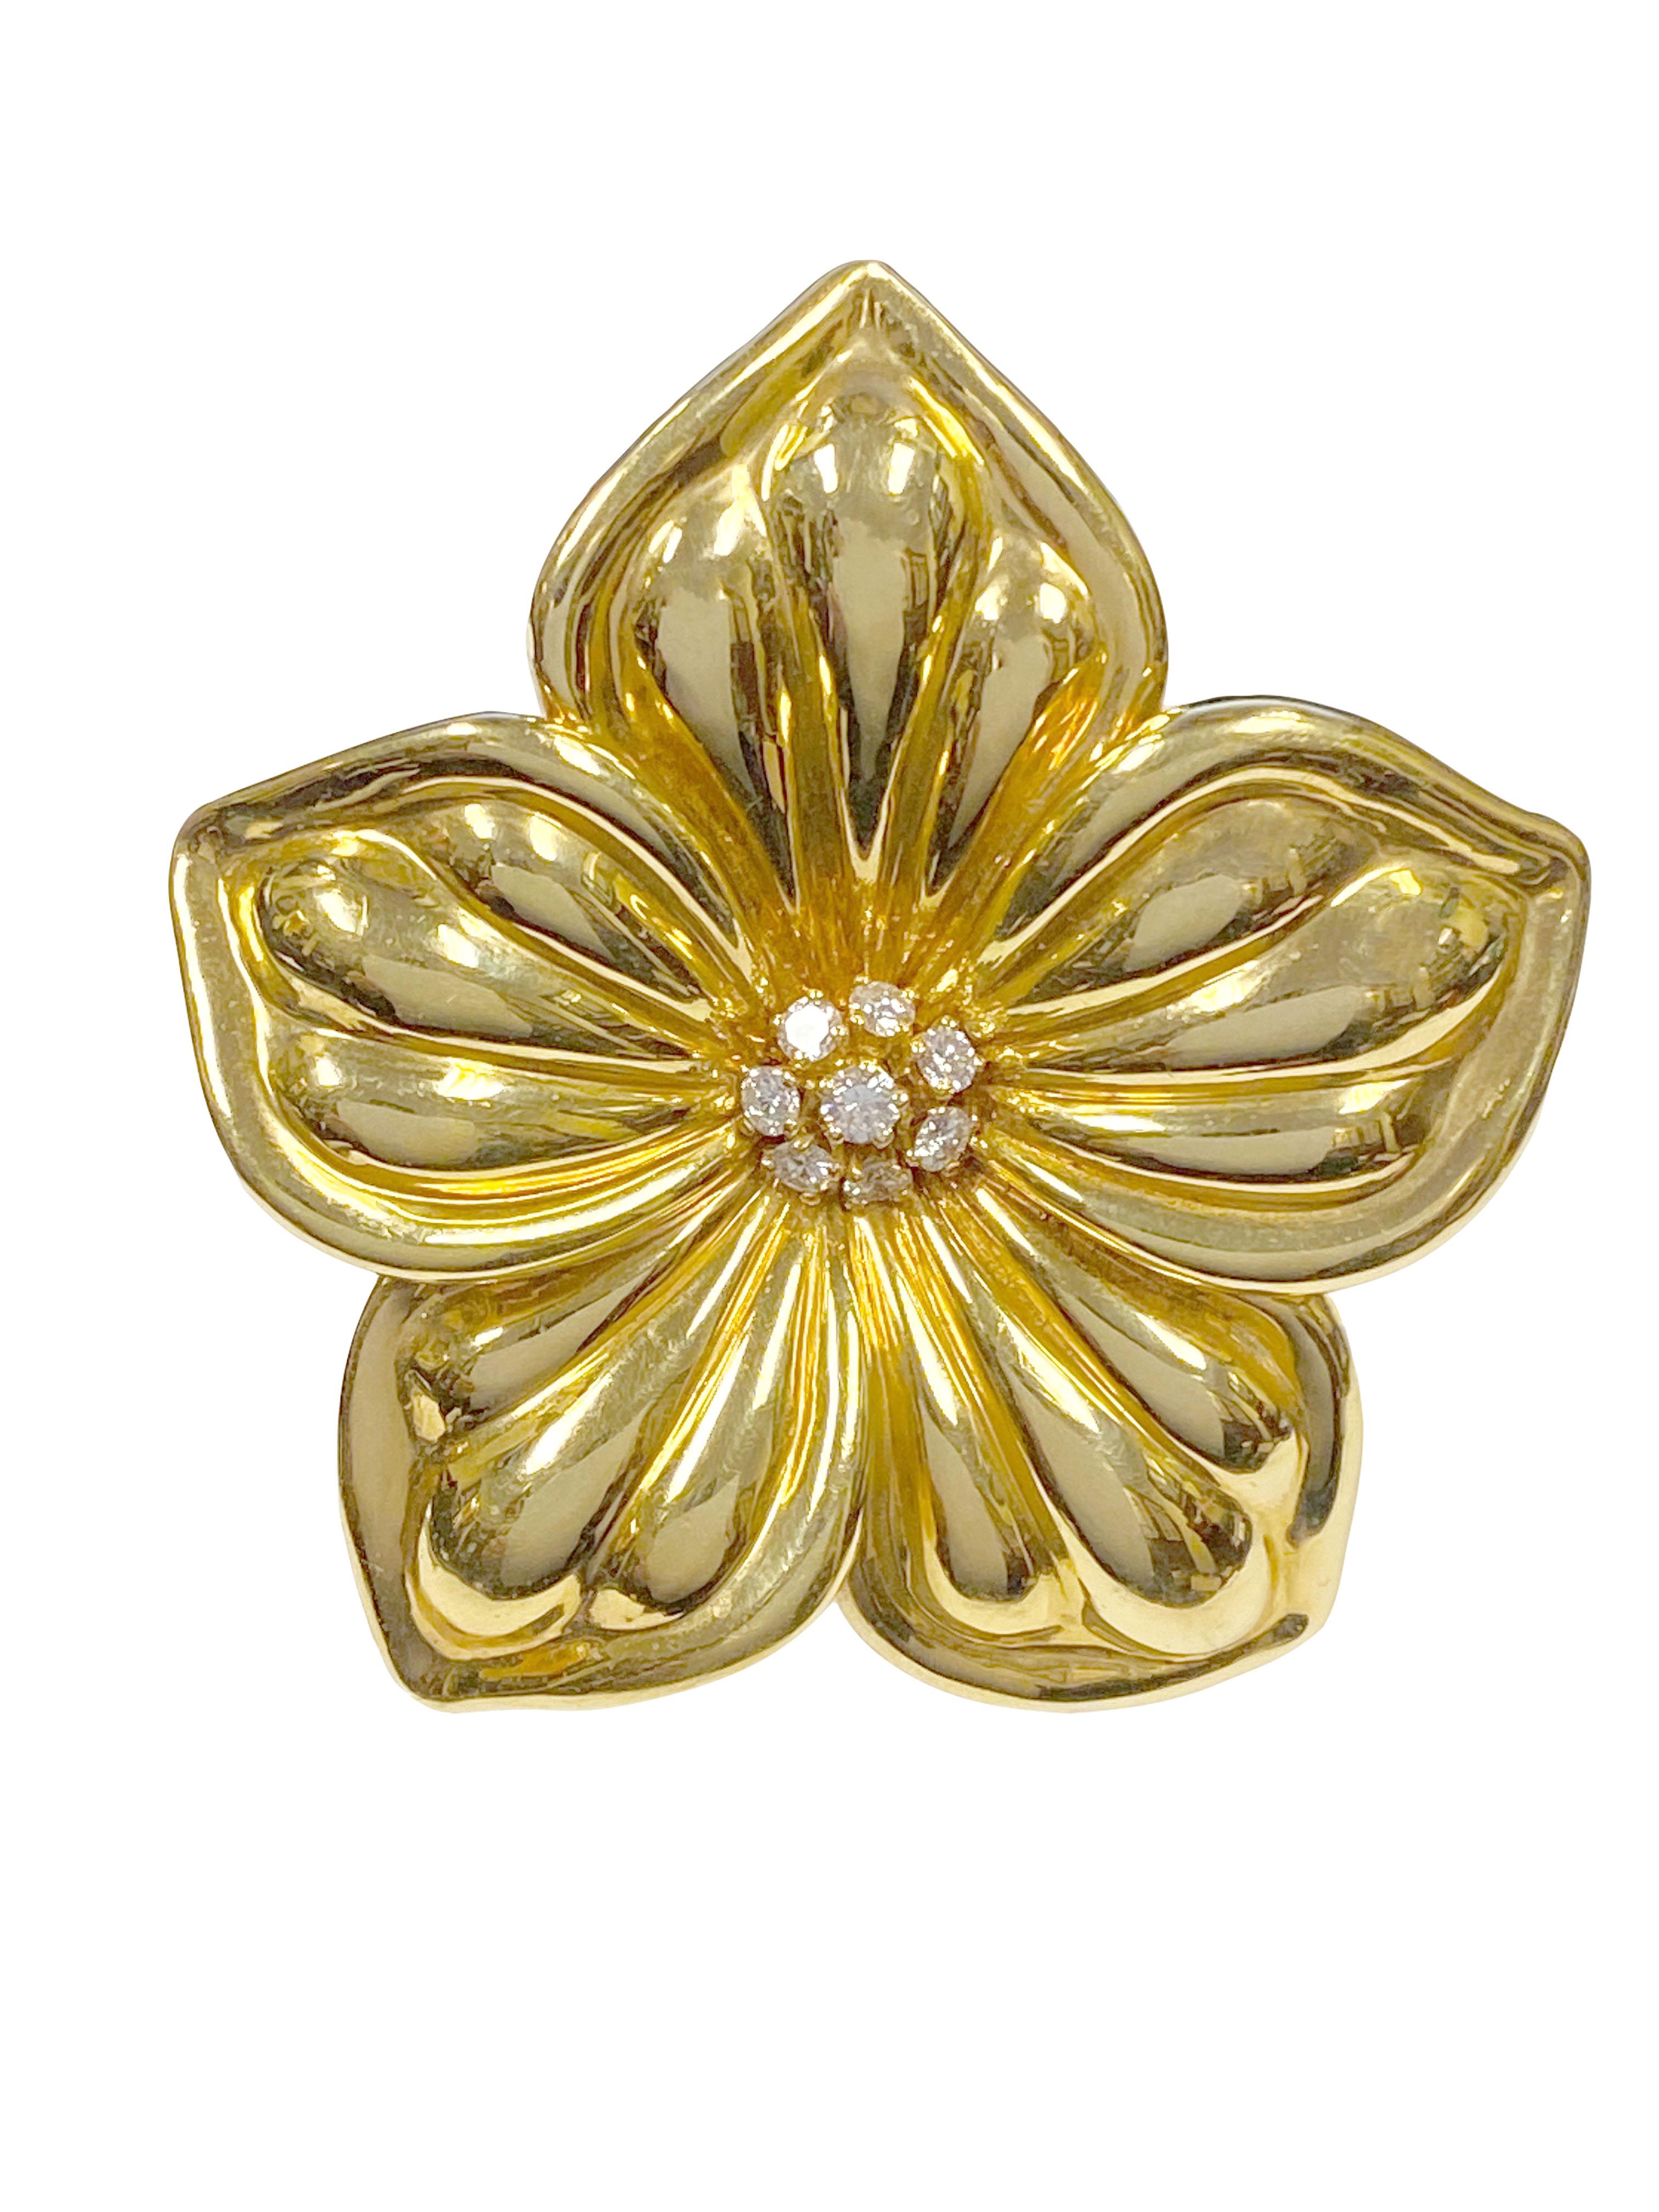 Circa 2000 Van Cleef & Arpels 18K yellow Gold Magnolia Flower Brooch, measuring 2 1/2 inches in diameter and centrally set with with Round Brilliant cut Diamonds totaling .45 Carat. Comes in a VCA suede pouch.